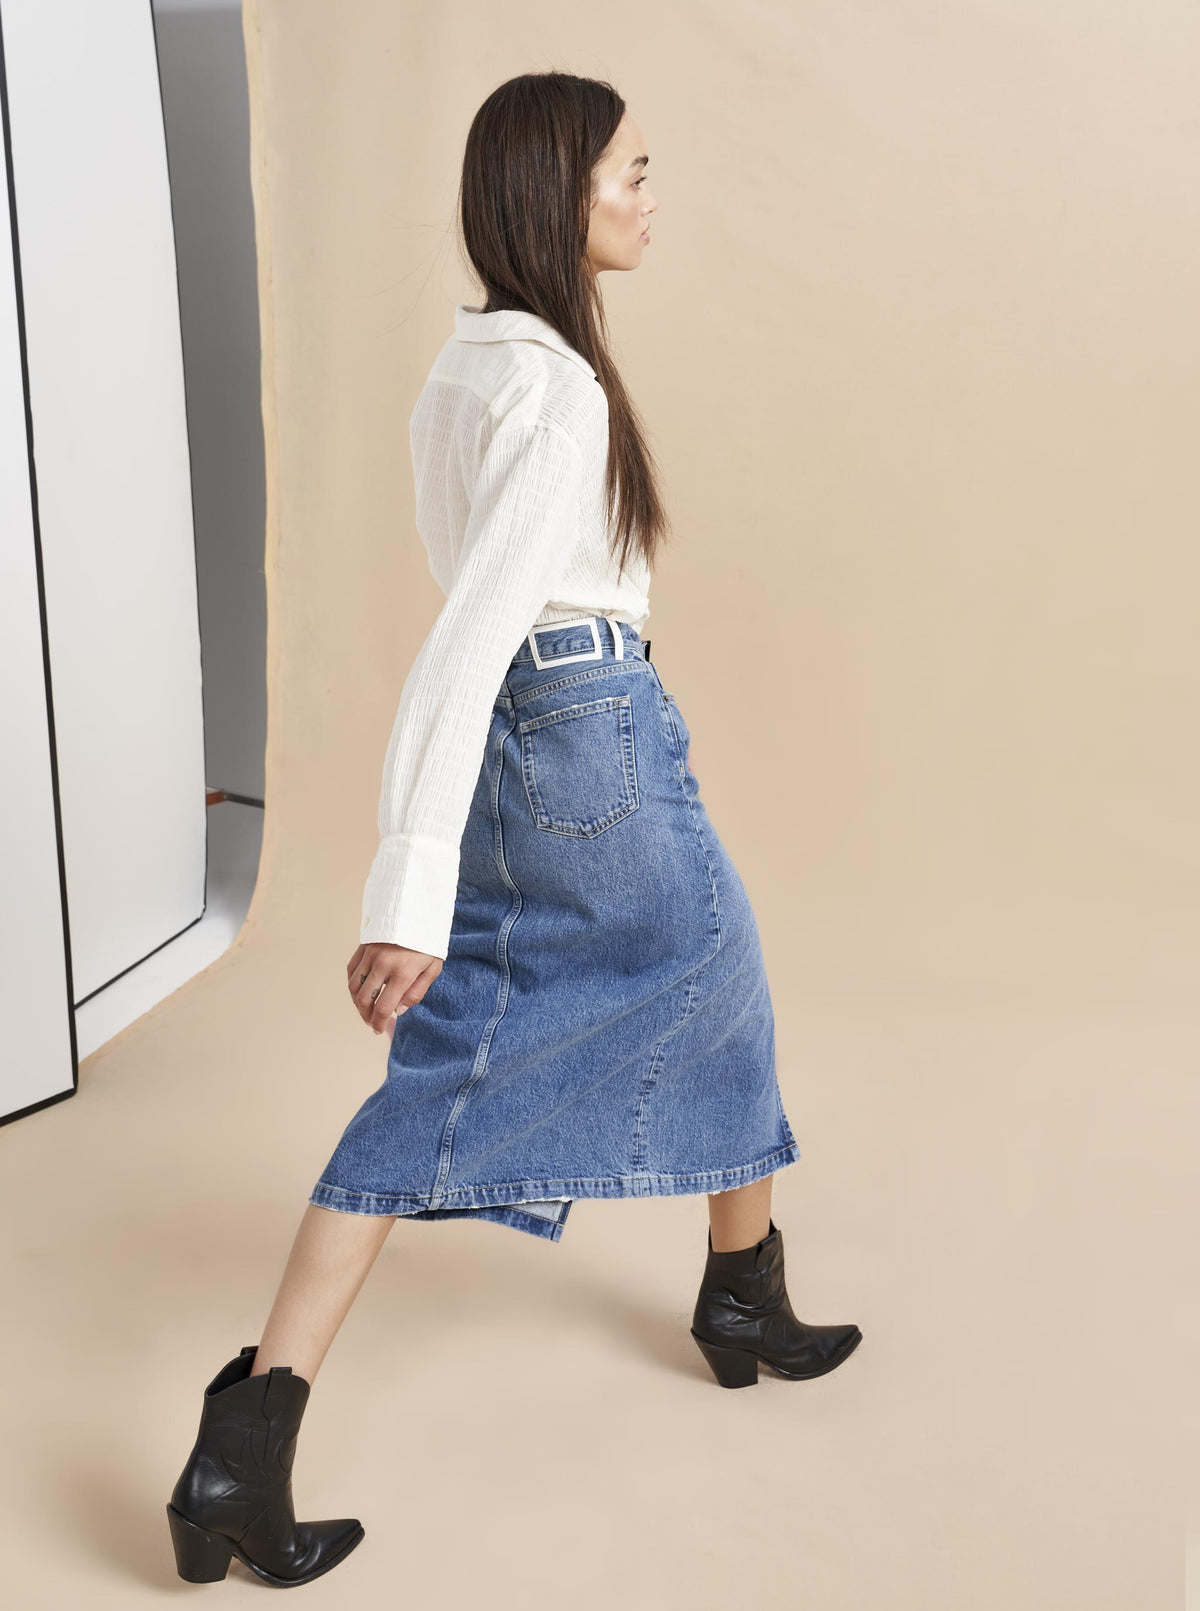 No denim collection is complete without this high rise, slightly A-line, medium wash, jean skirt. Pair it back to our Dean Jacket or simply top it off with one of our cozy, cashmere sweaters. Destined to get better with age since this classic, feminine skirt will never go out of style.